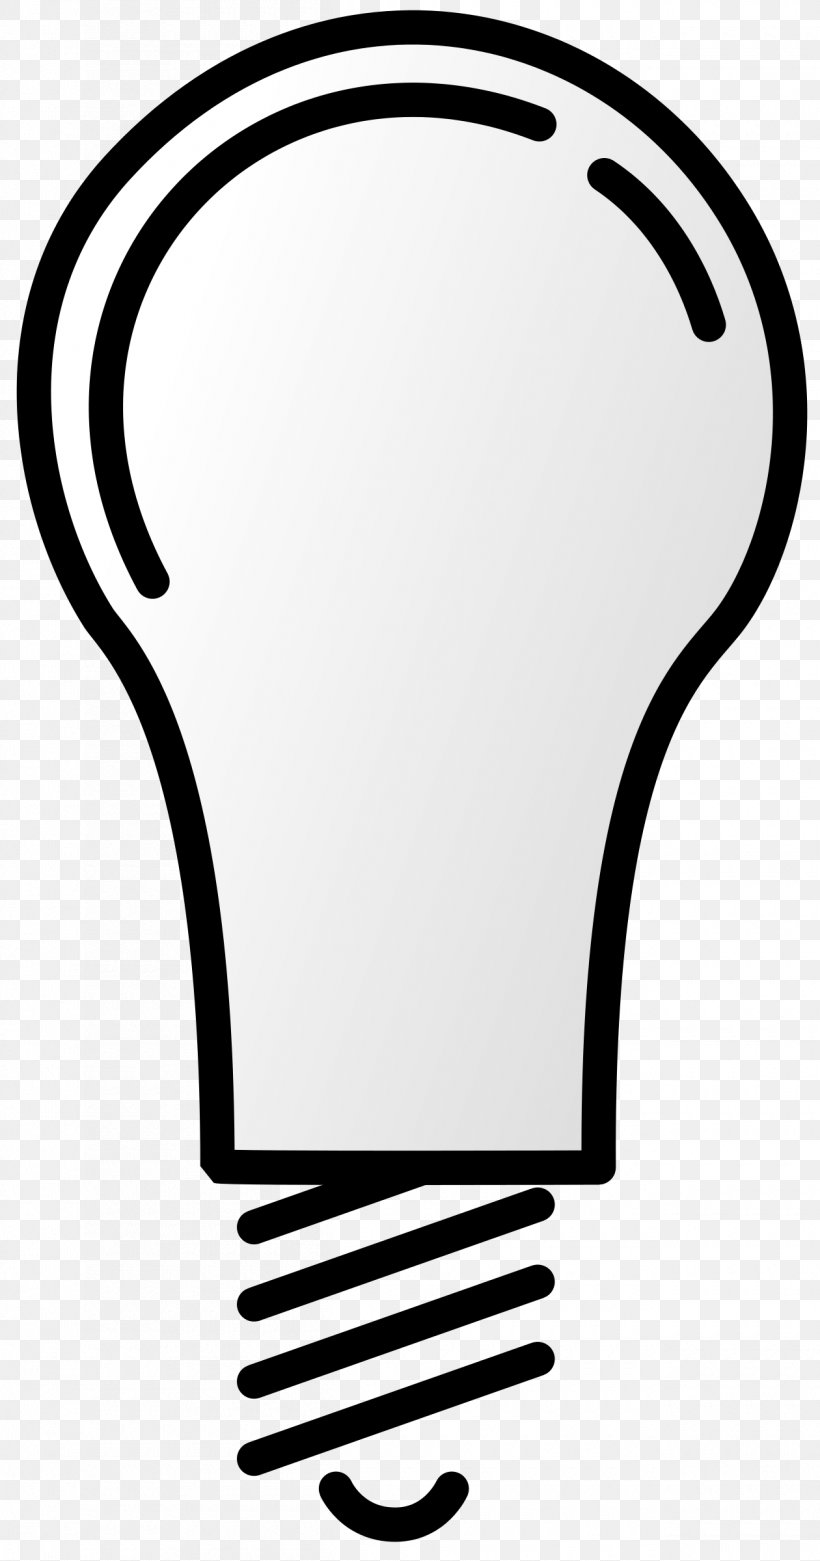 Incandescent Light Bulb Lamp Clip Art, PNG, 1260x2400px, Light, Area, Black And White, Christmas Lights, Compact Fluorescent Lamp Download Free